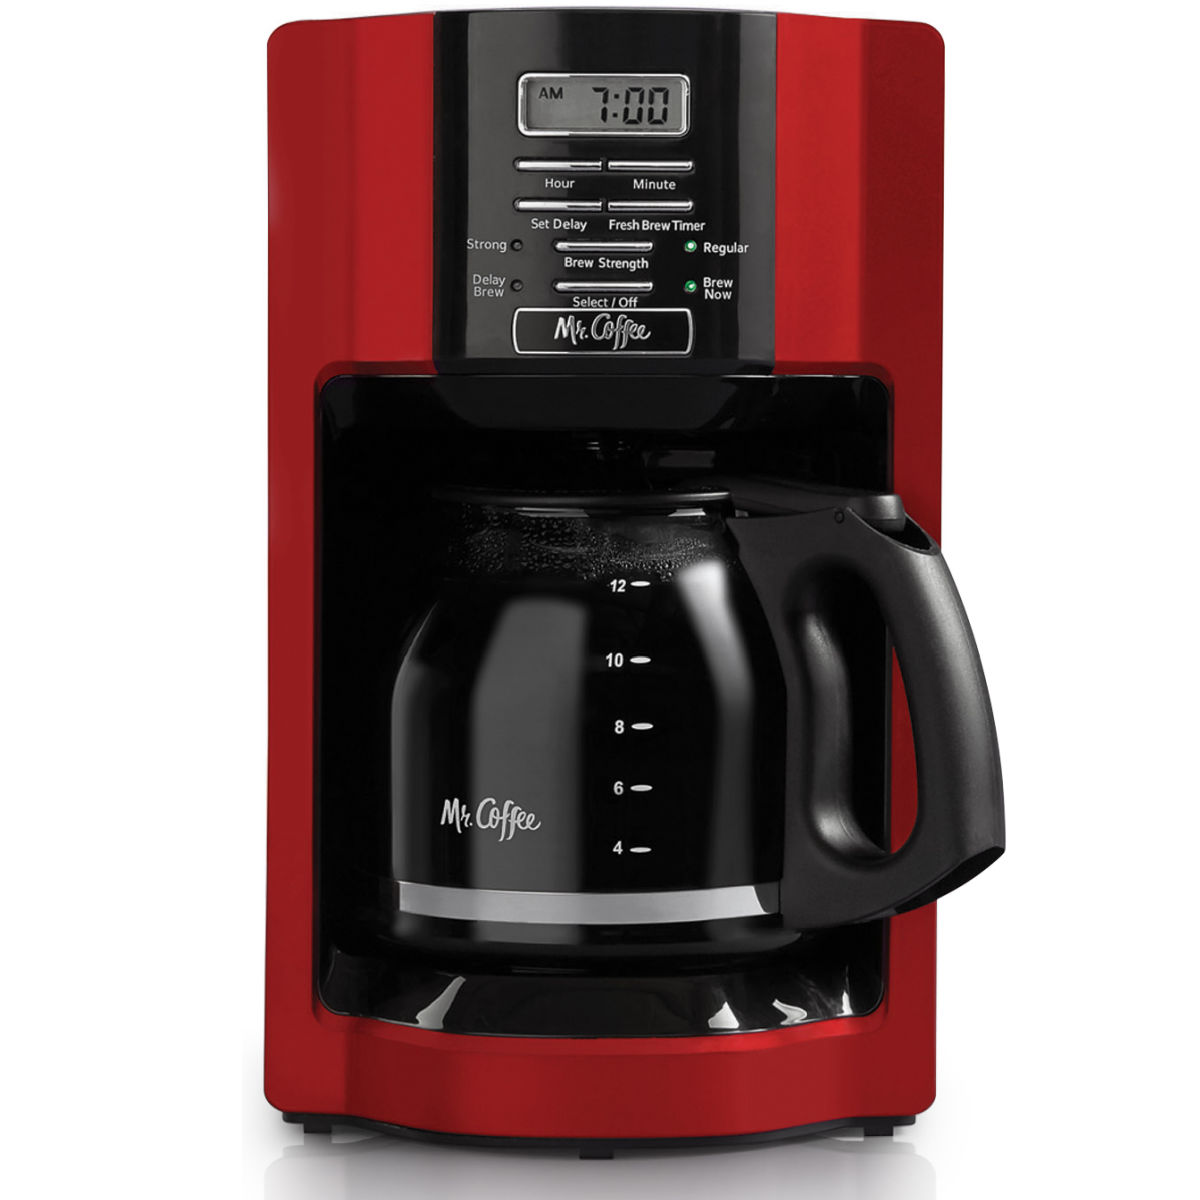 Mr. Coffee 2082689 12-Cup Automatic Drip Coffee Maker